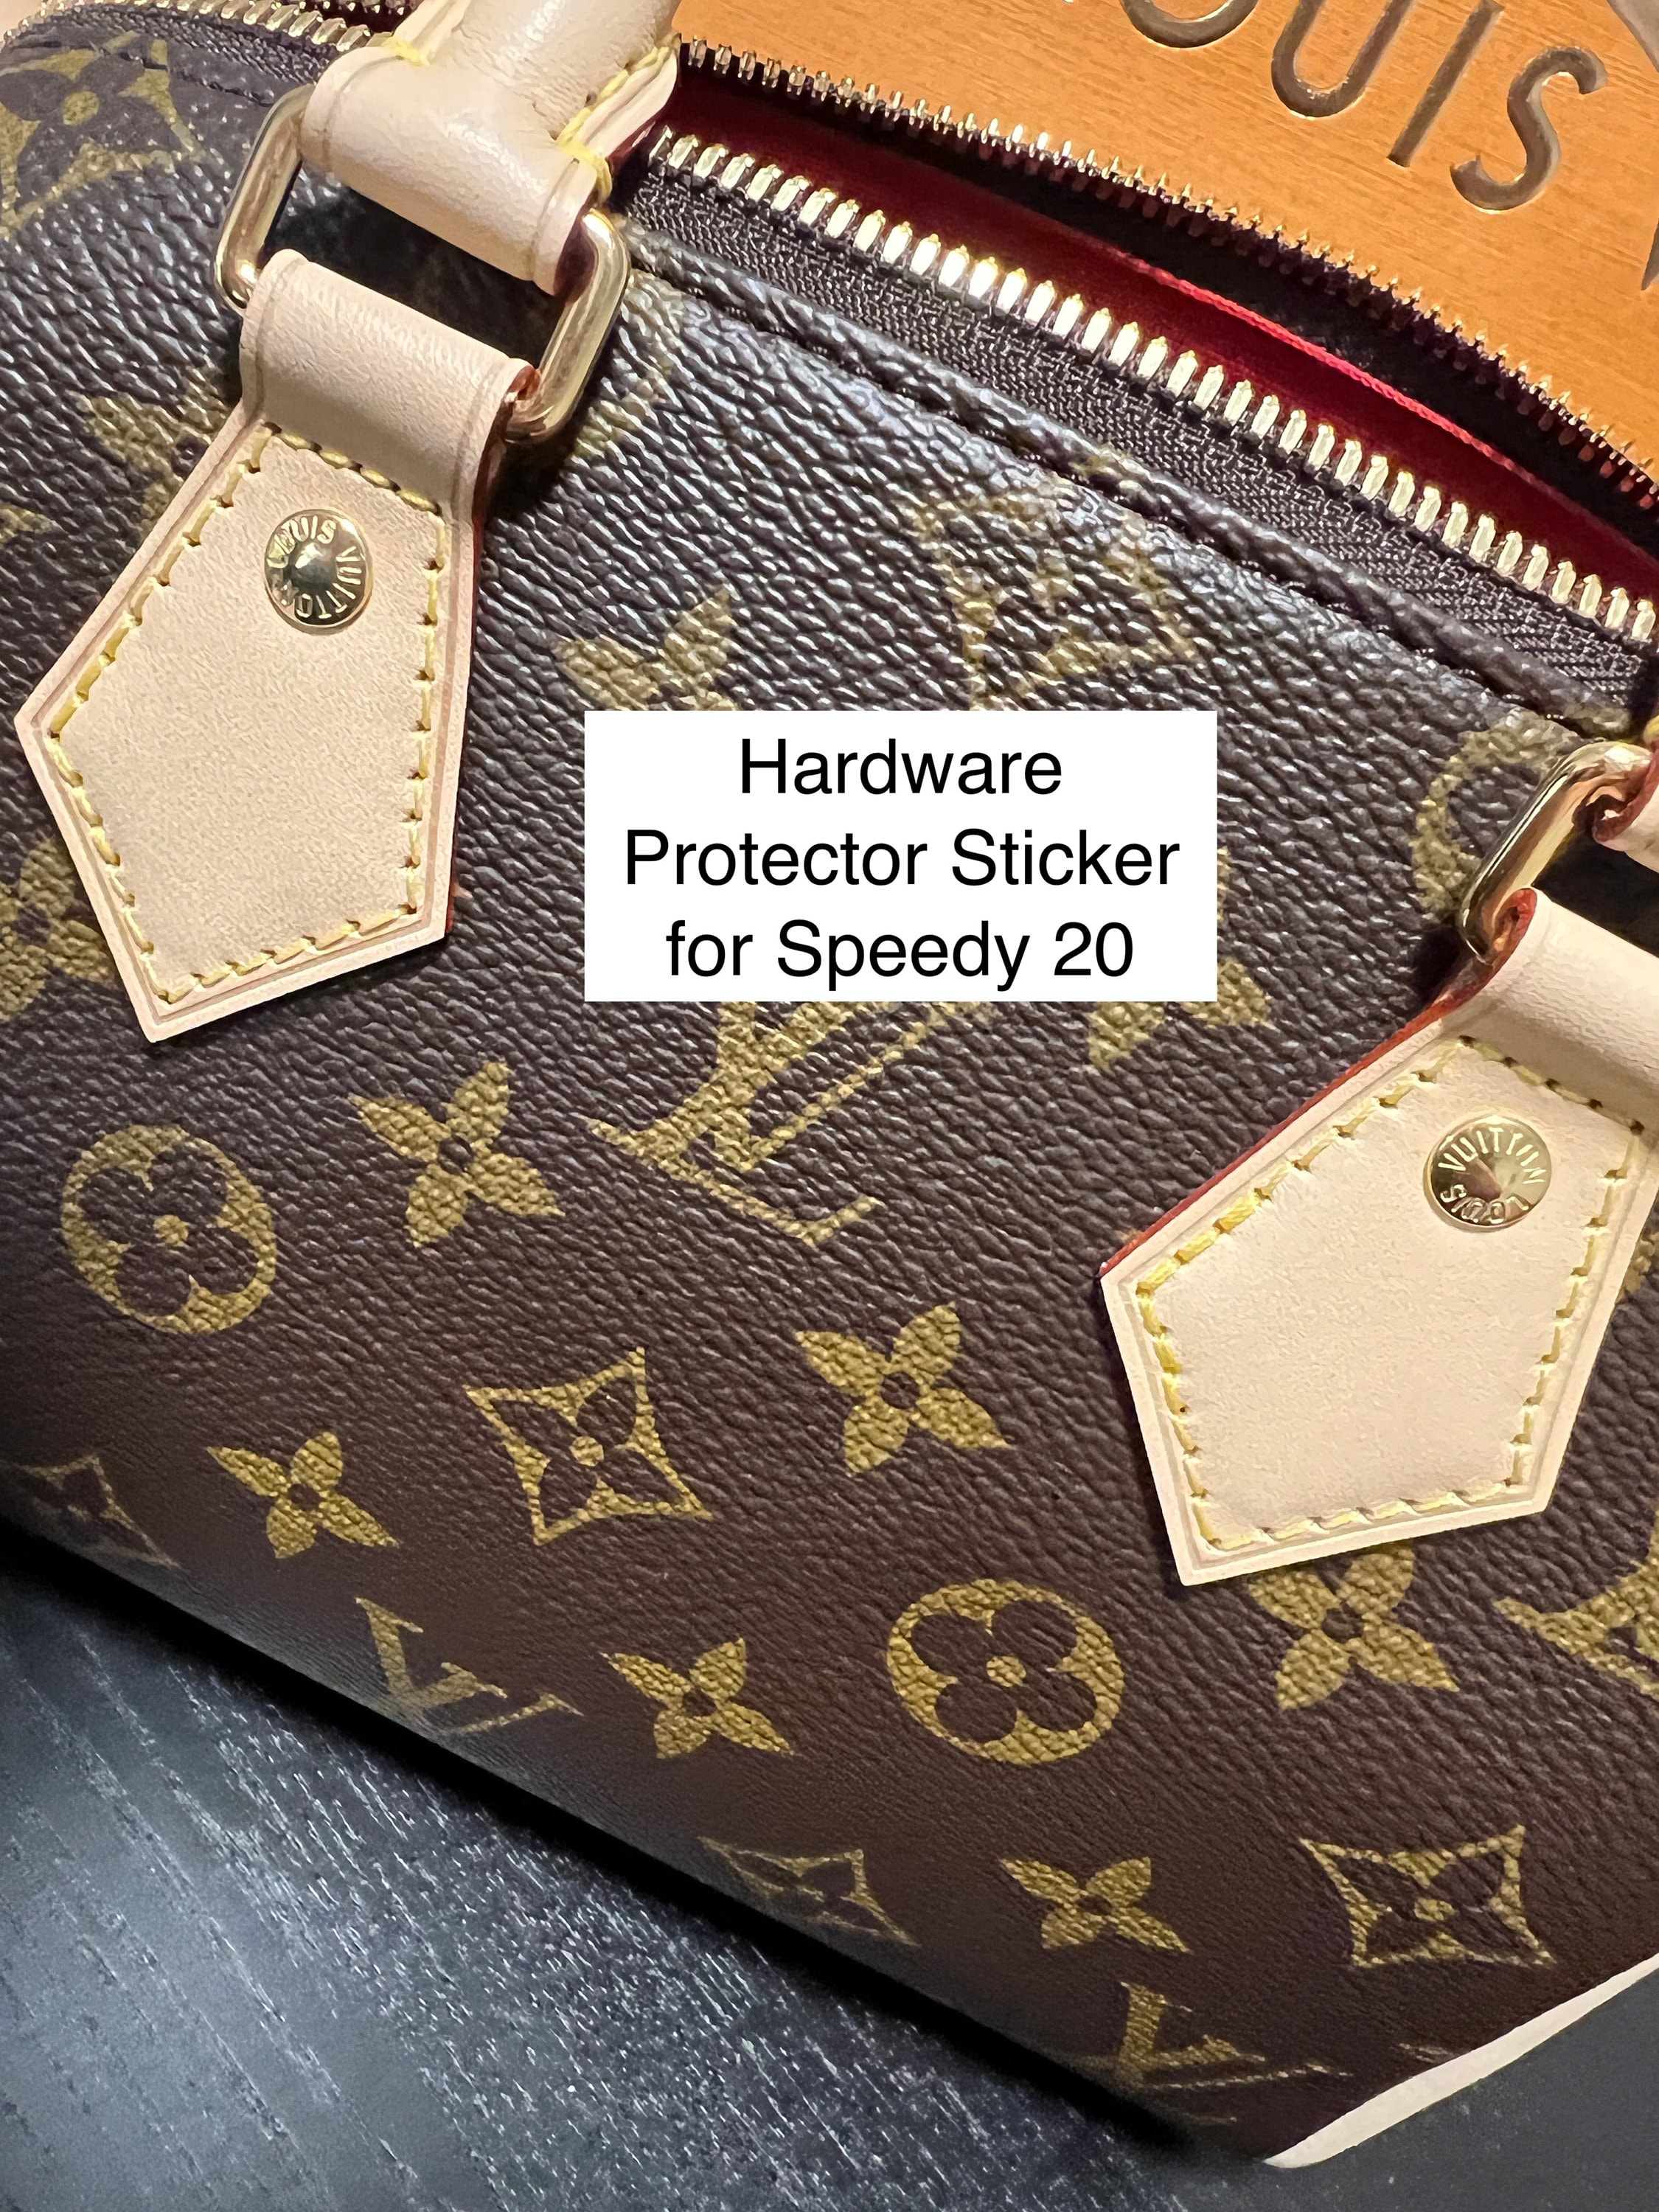 Hardware Protector Sticker for Speedy 20 -  India